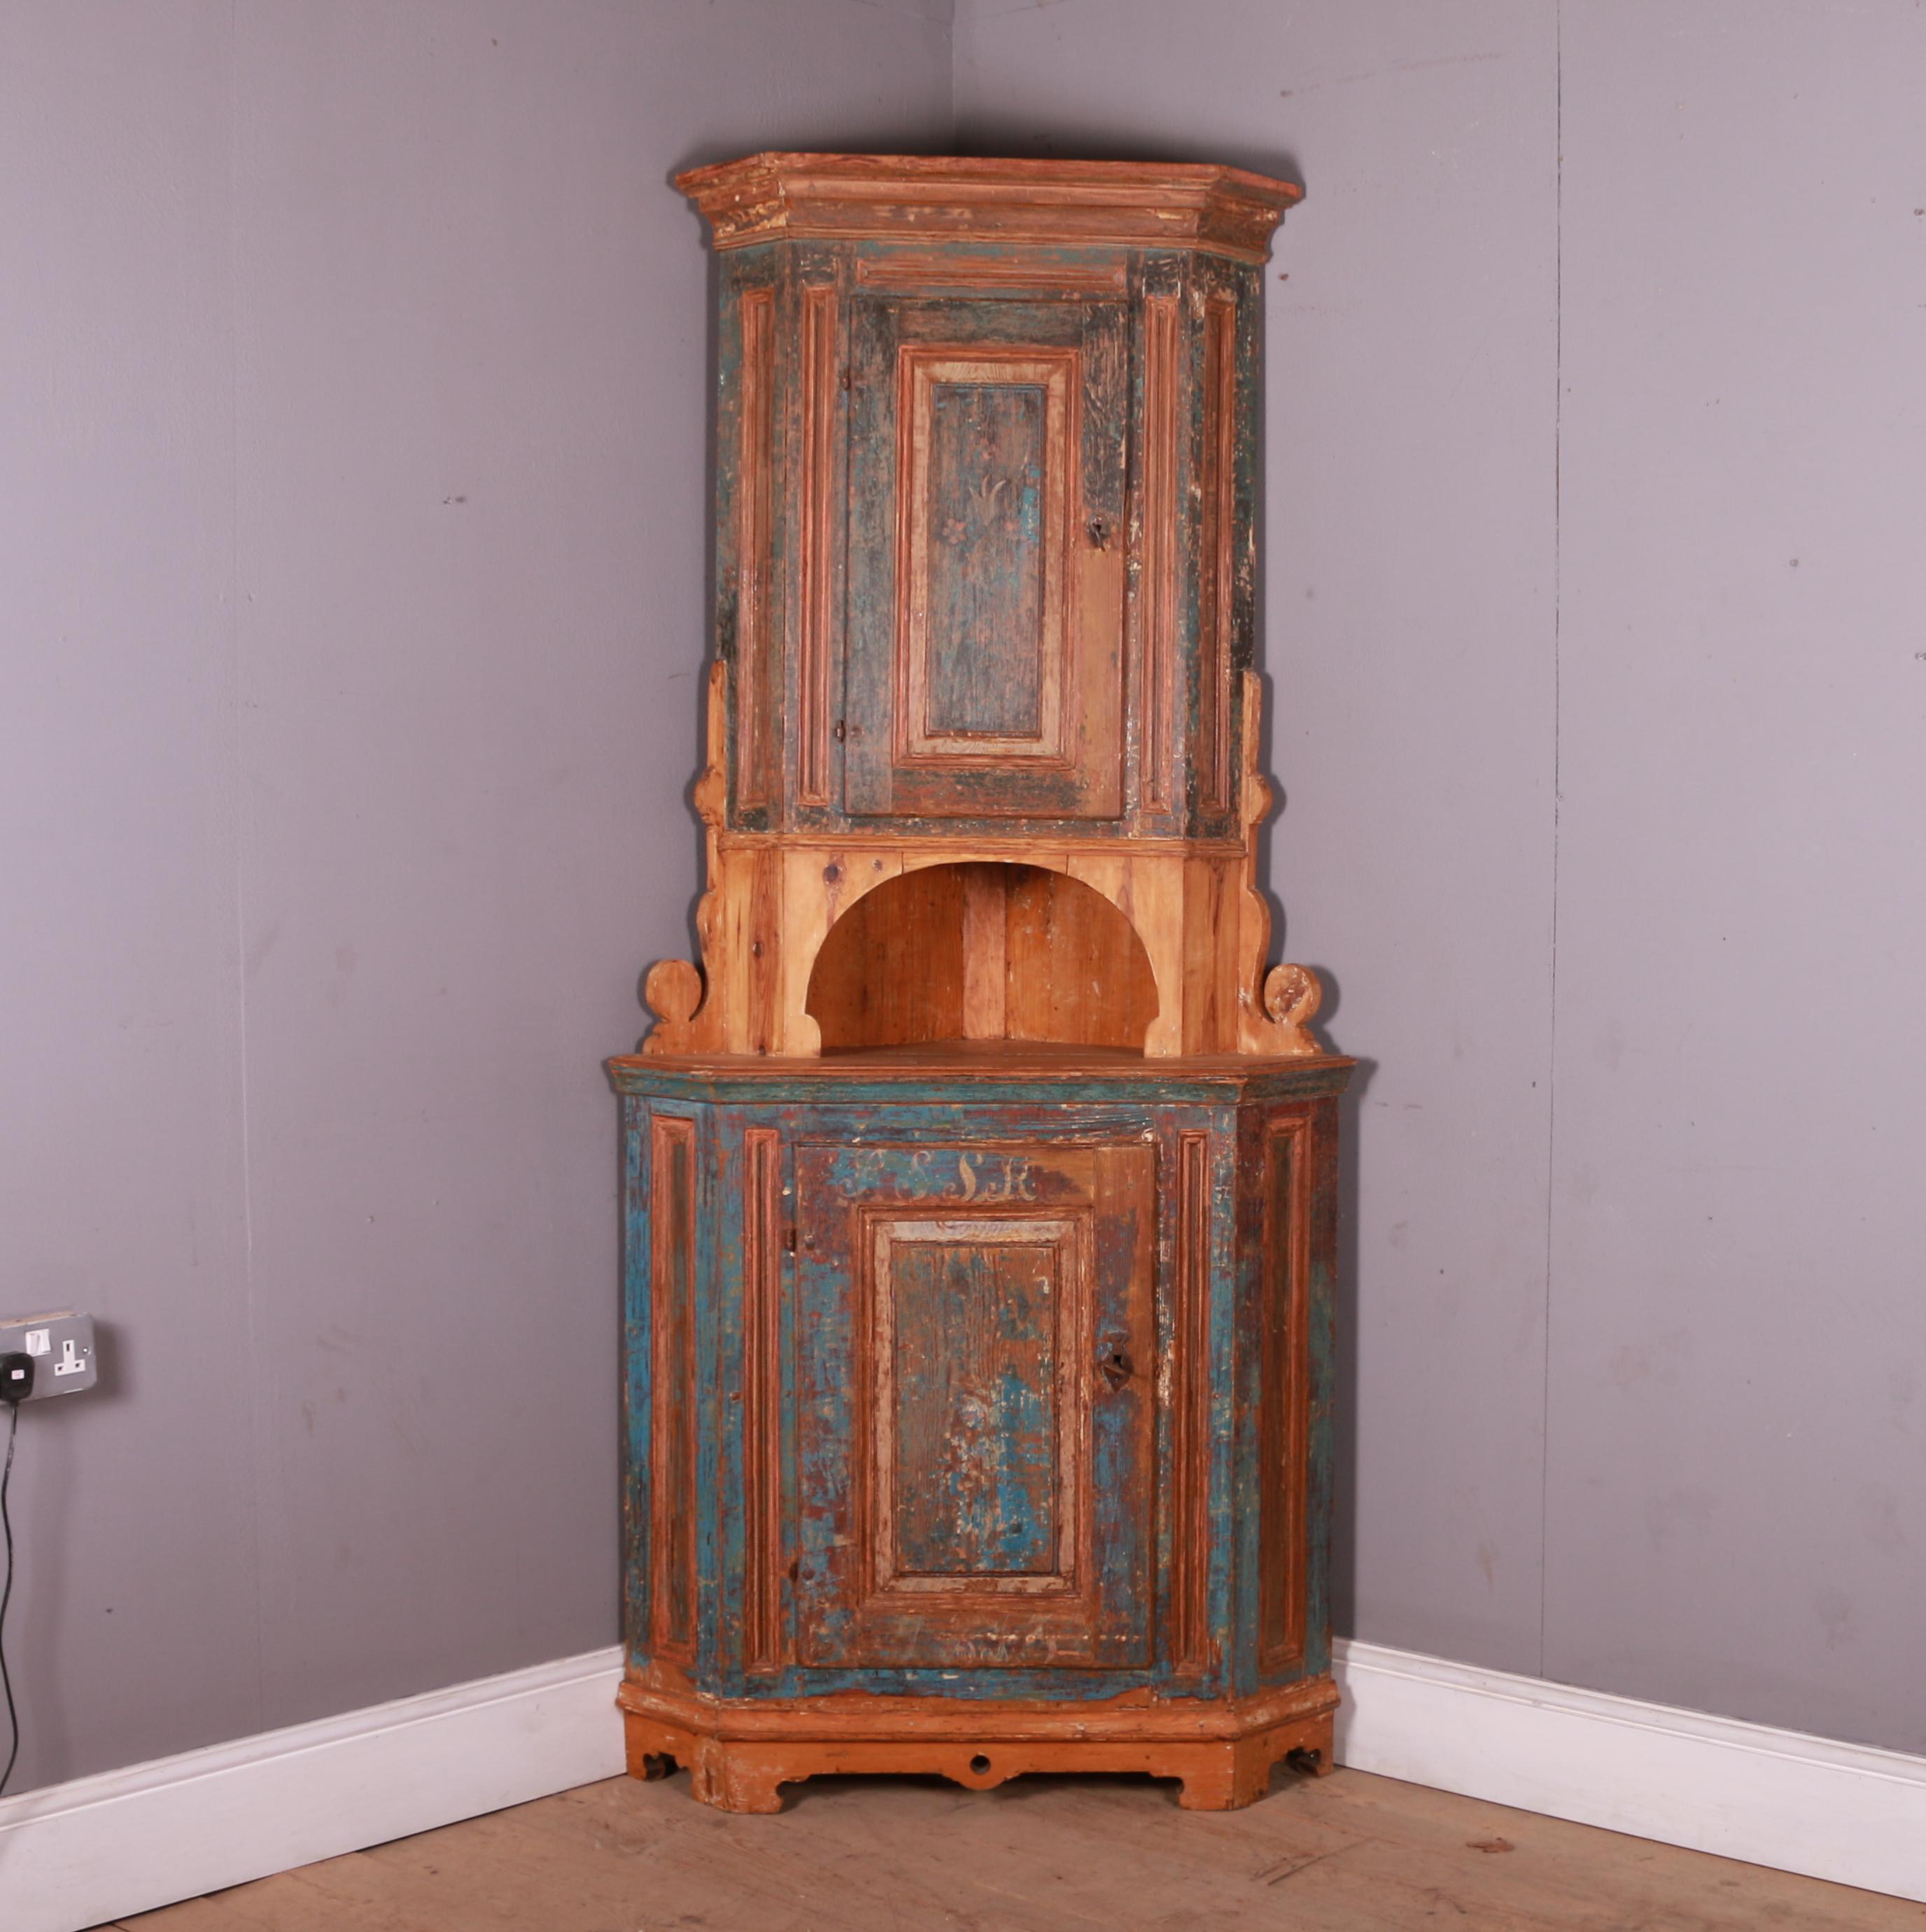 Wonderful early 19th C original painted Swedish one piece corner cupboard. This has been hand scraped back to the original paint finish. dated 1813.

This cupboard will fit into a 27